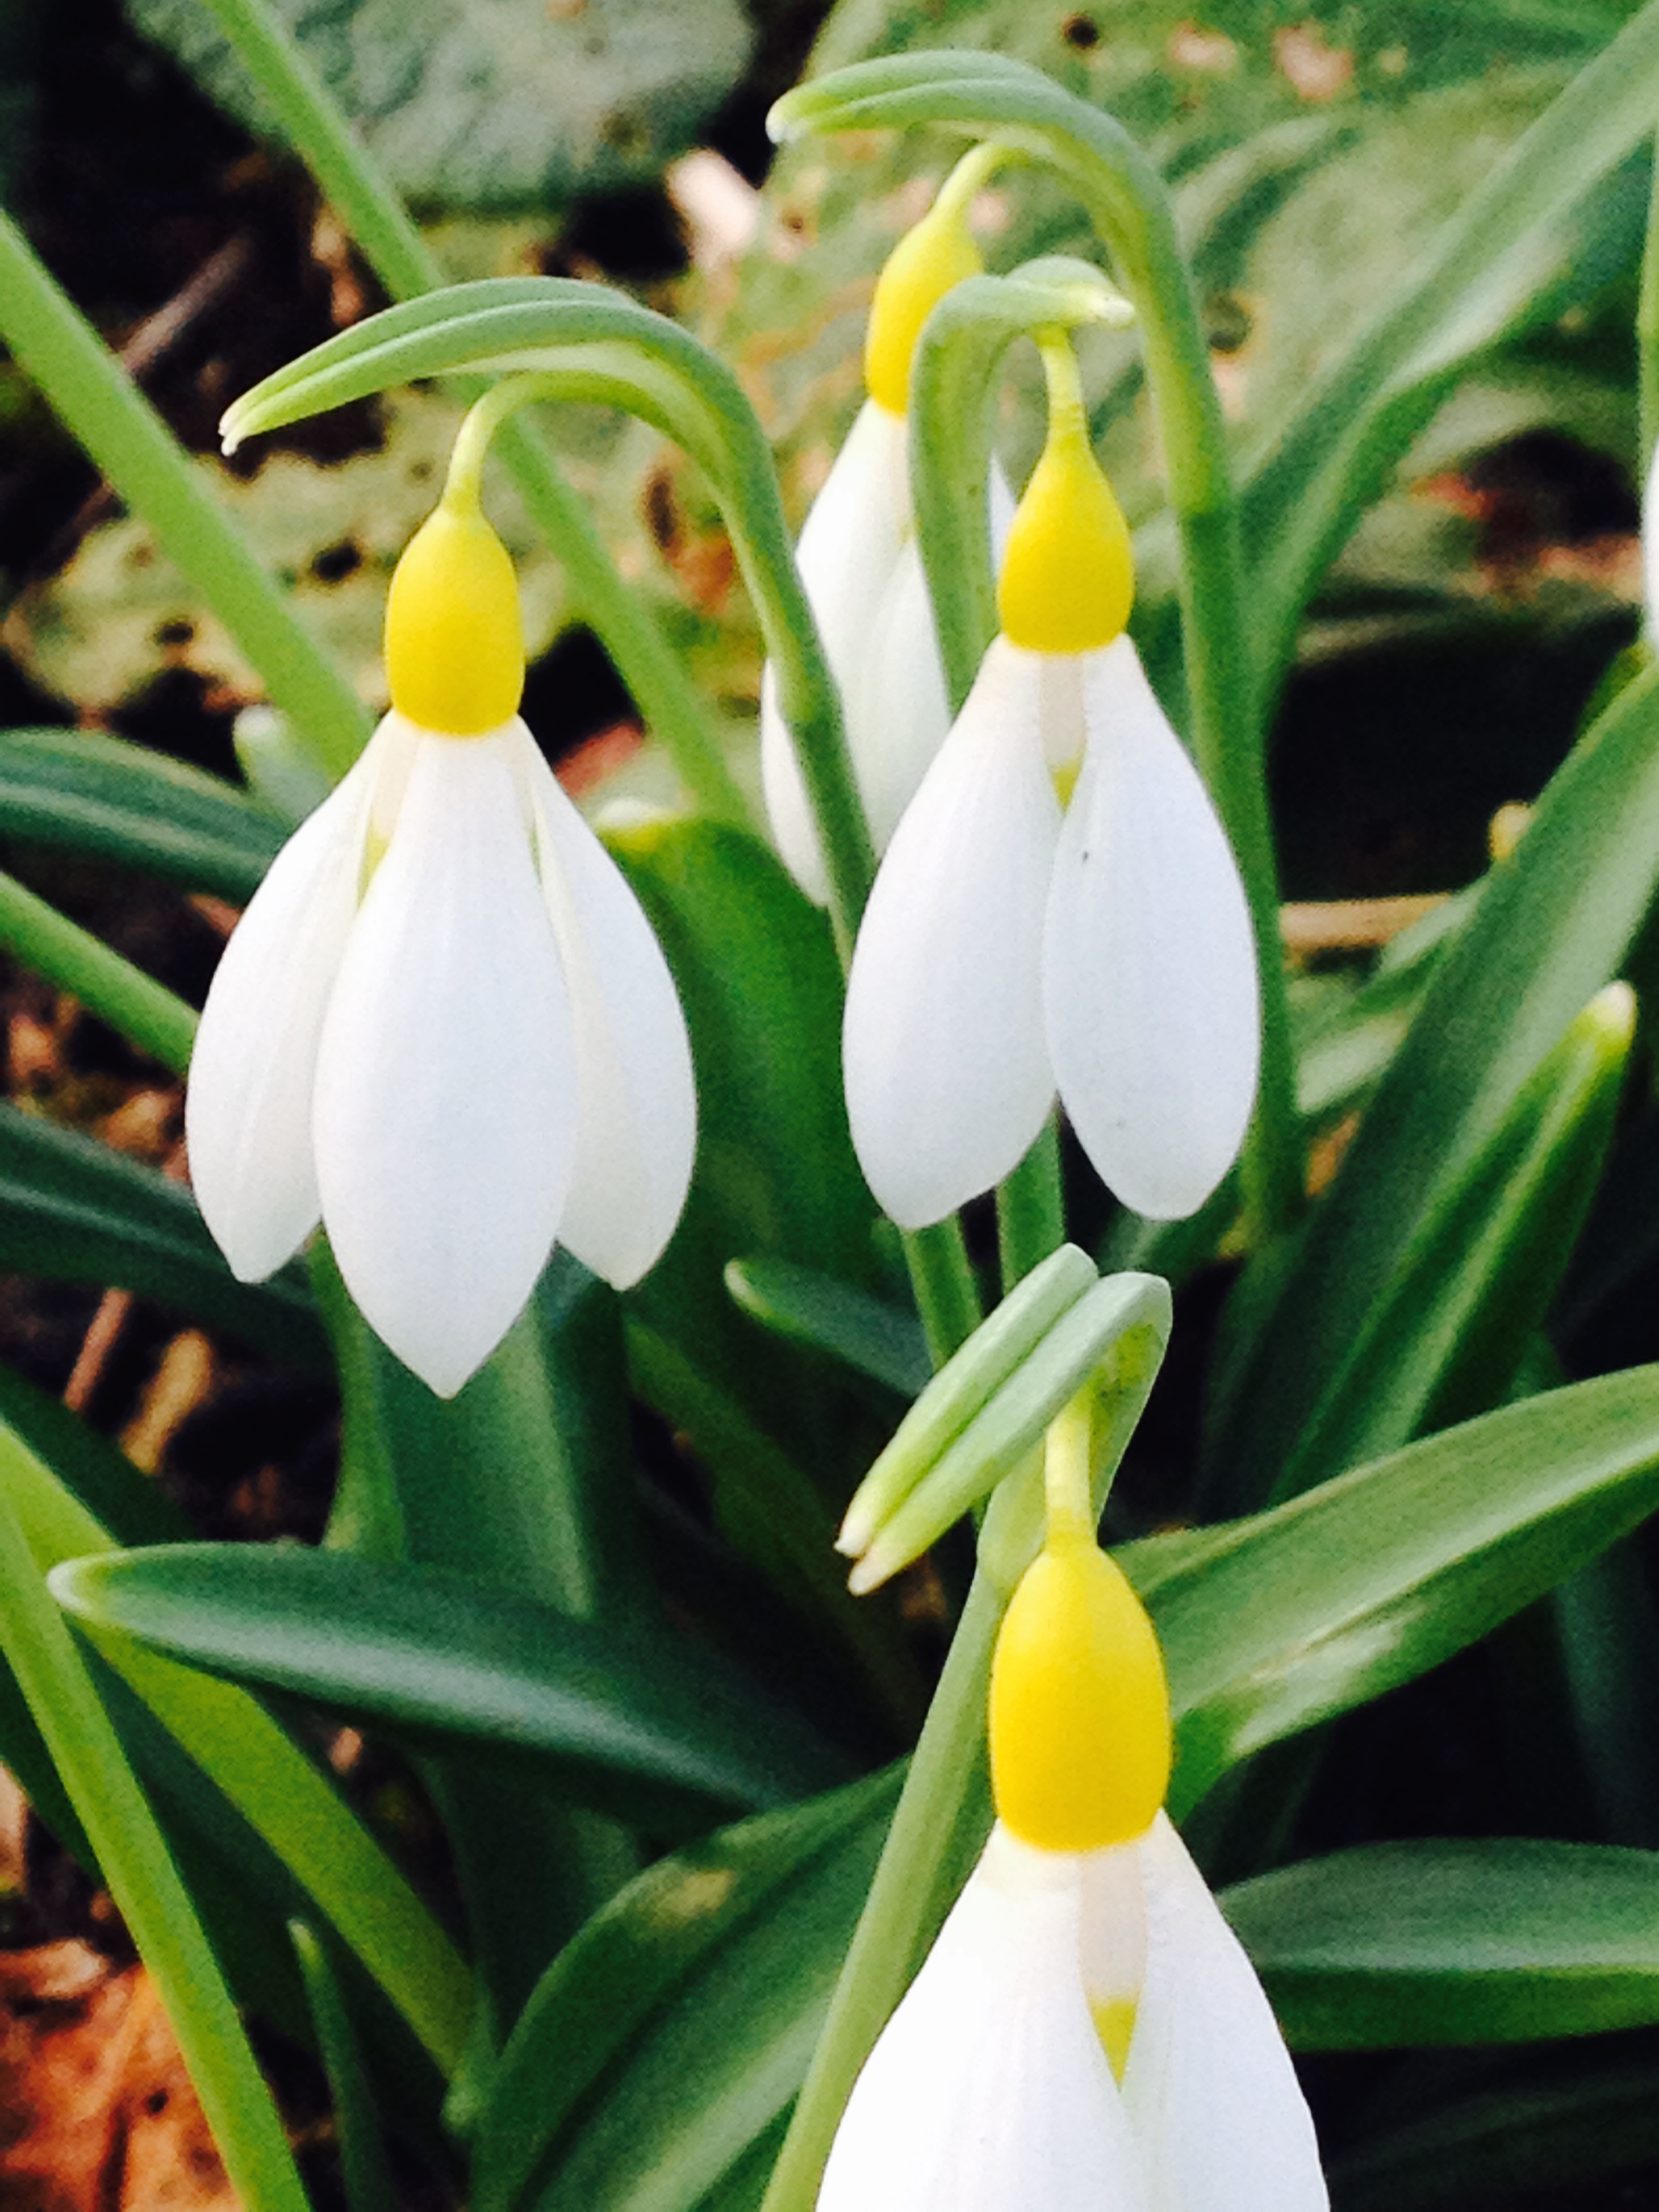 Sunday Snowdrops – OPENING EARLY to beat the weather